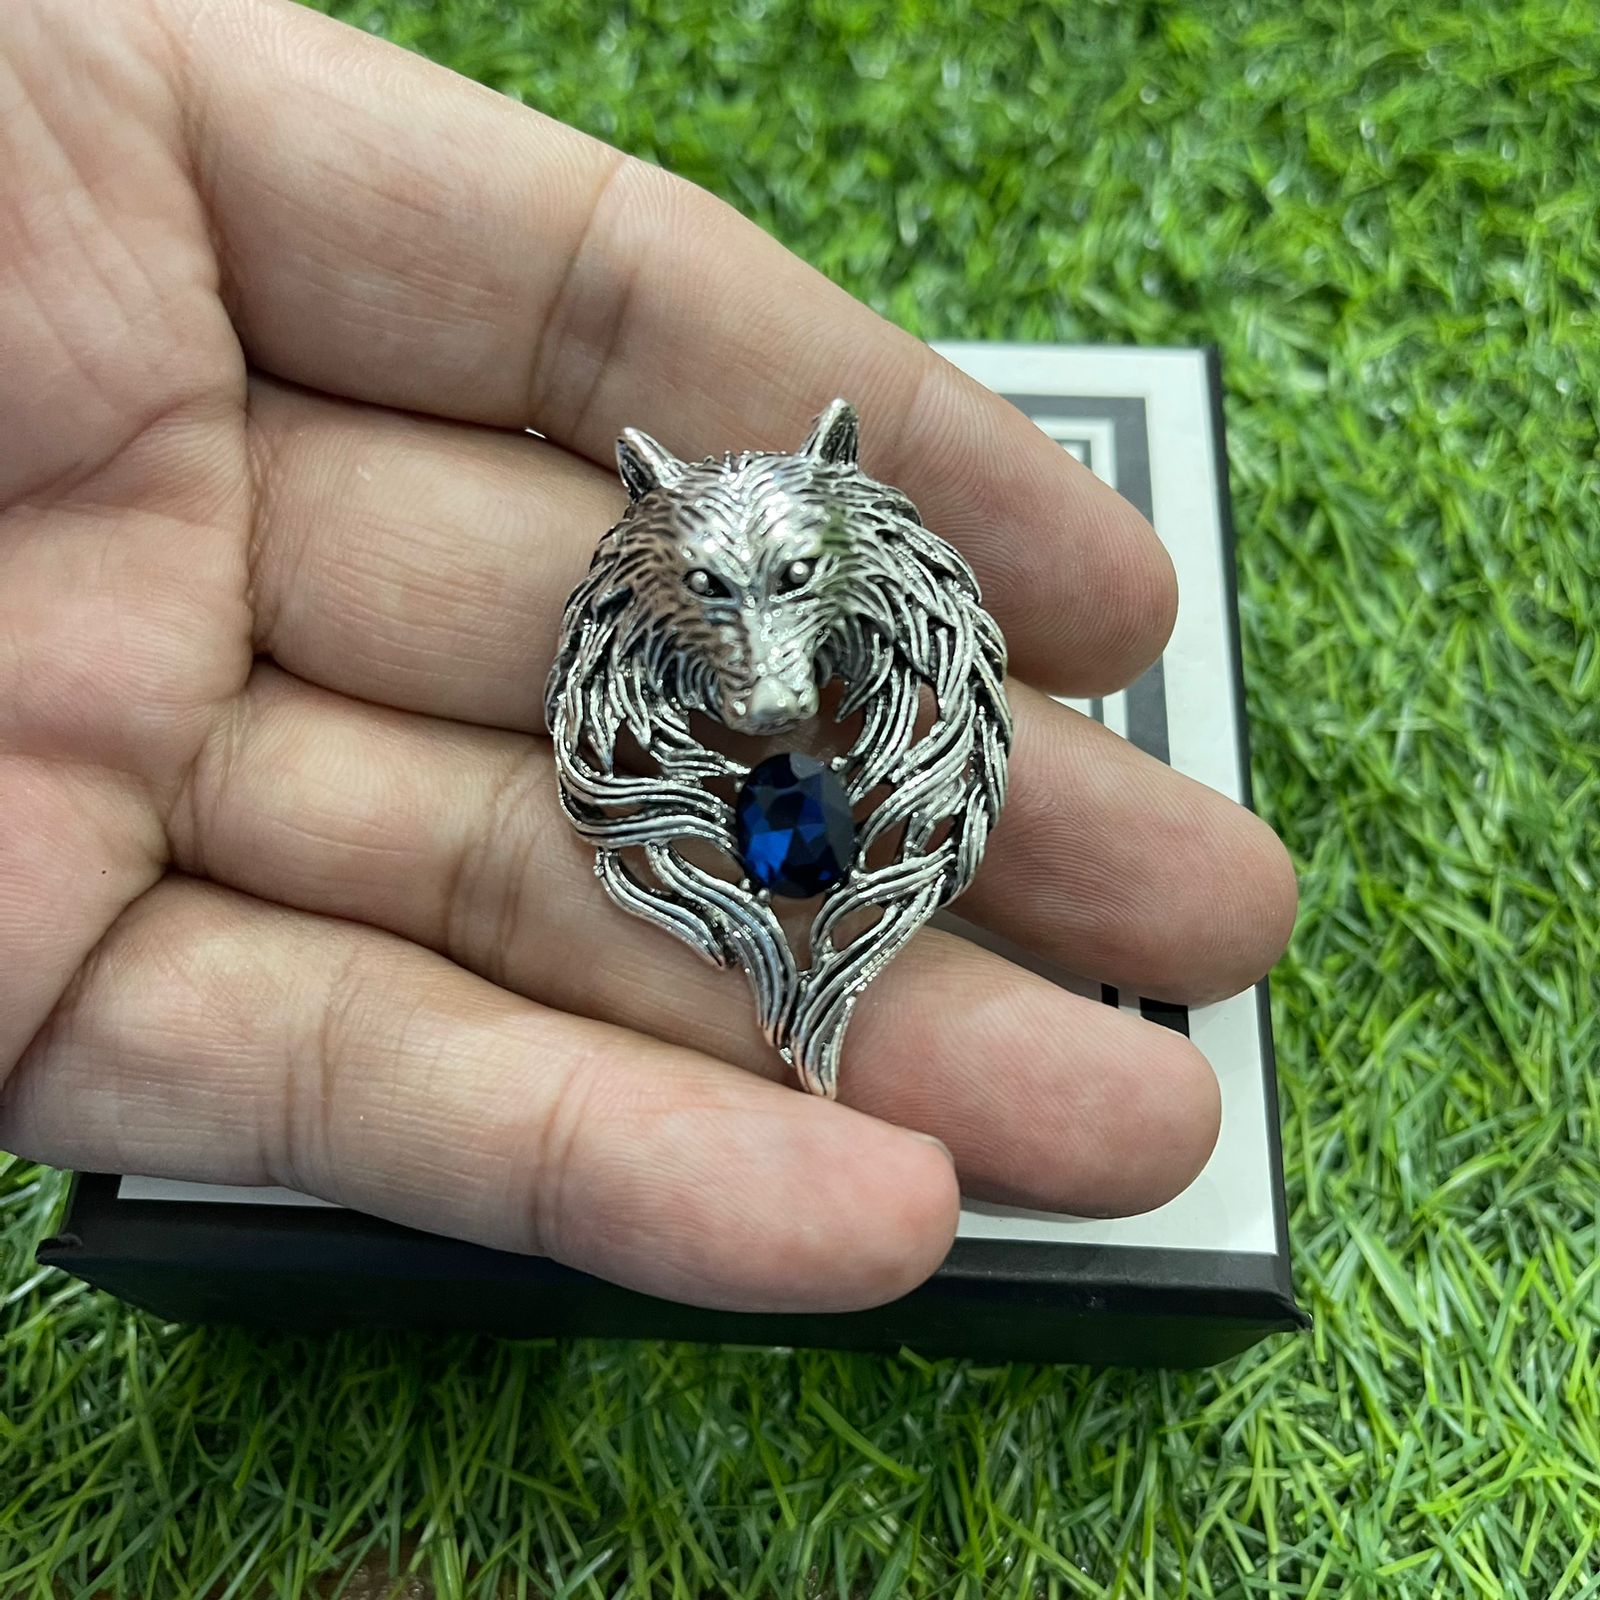 Silver 3D Wolf Brooch Lapel Pin For Men Suit 